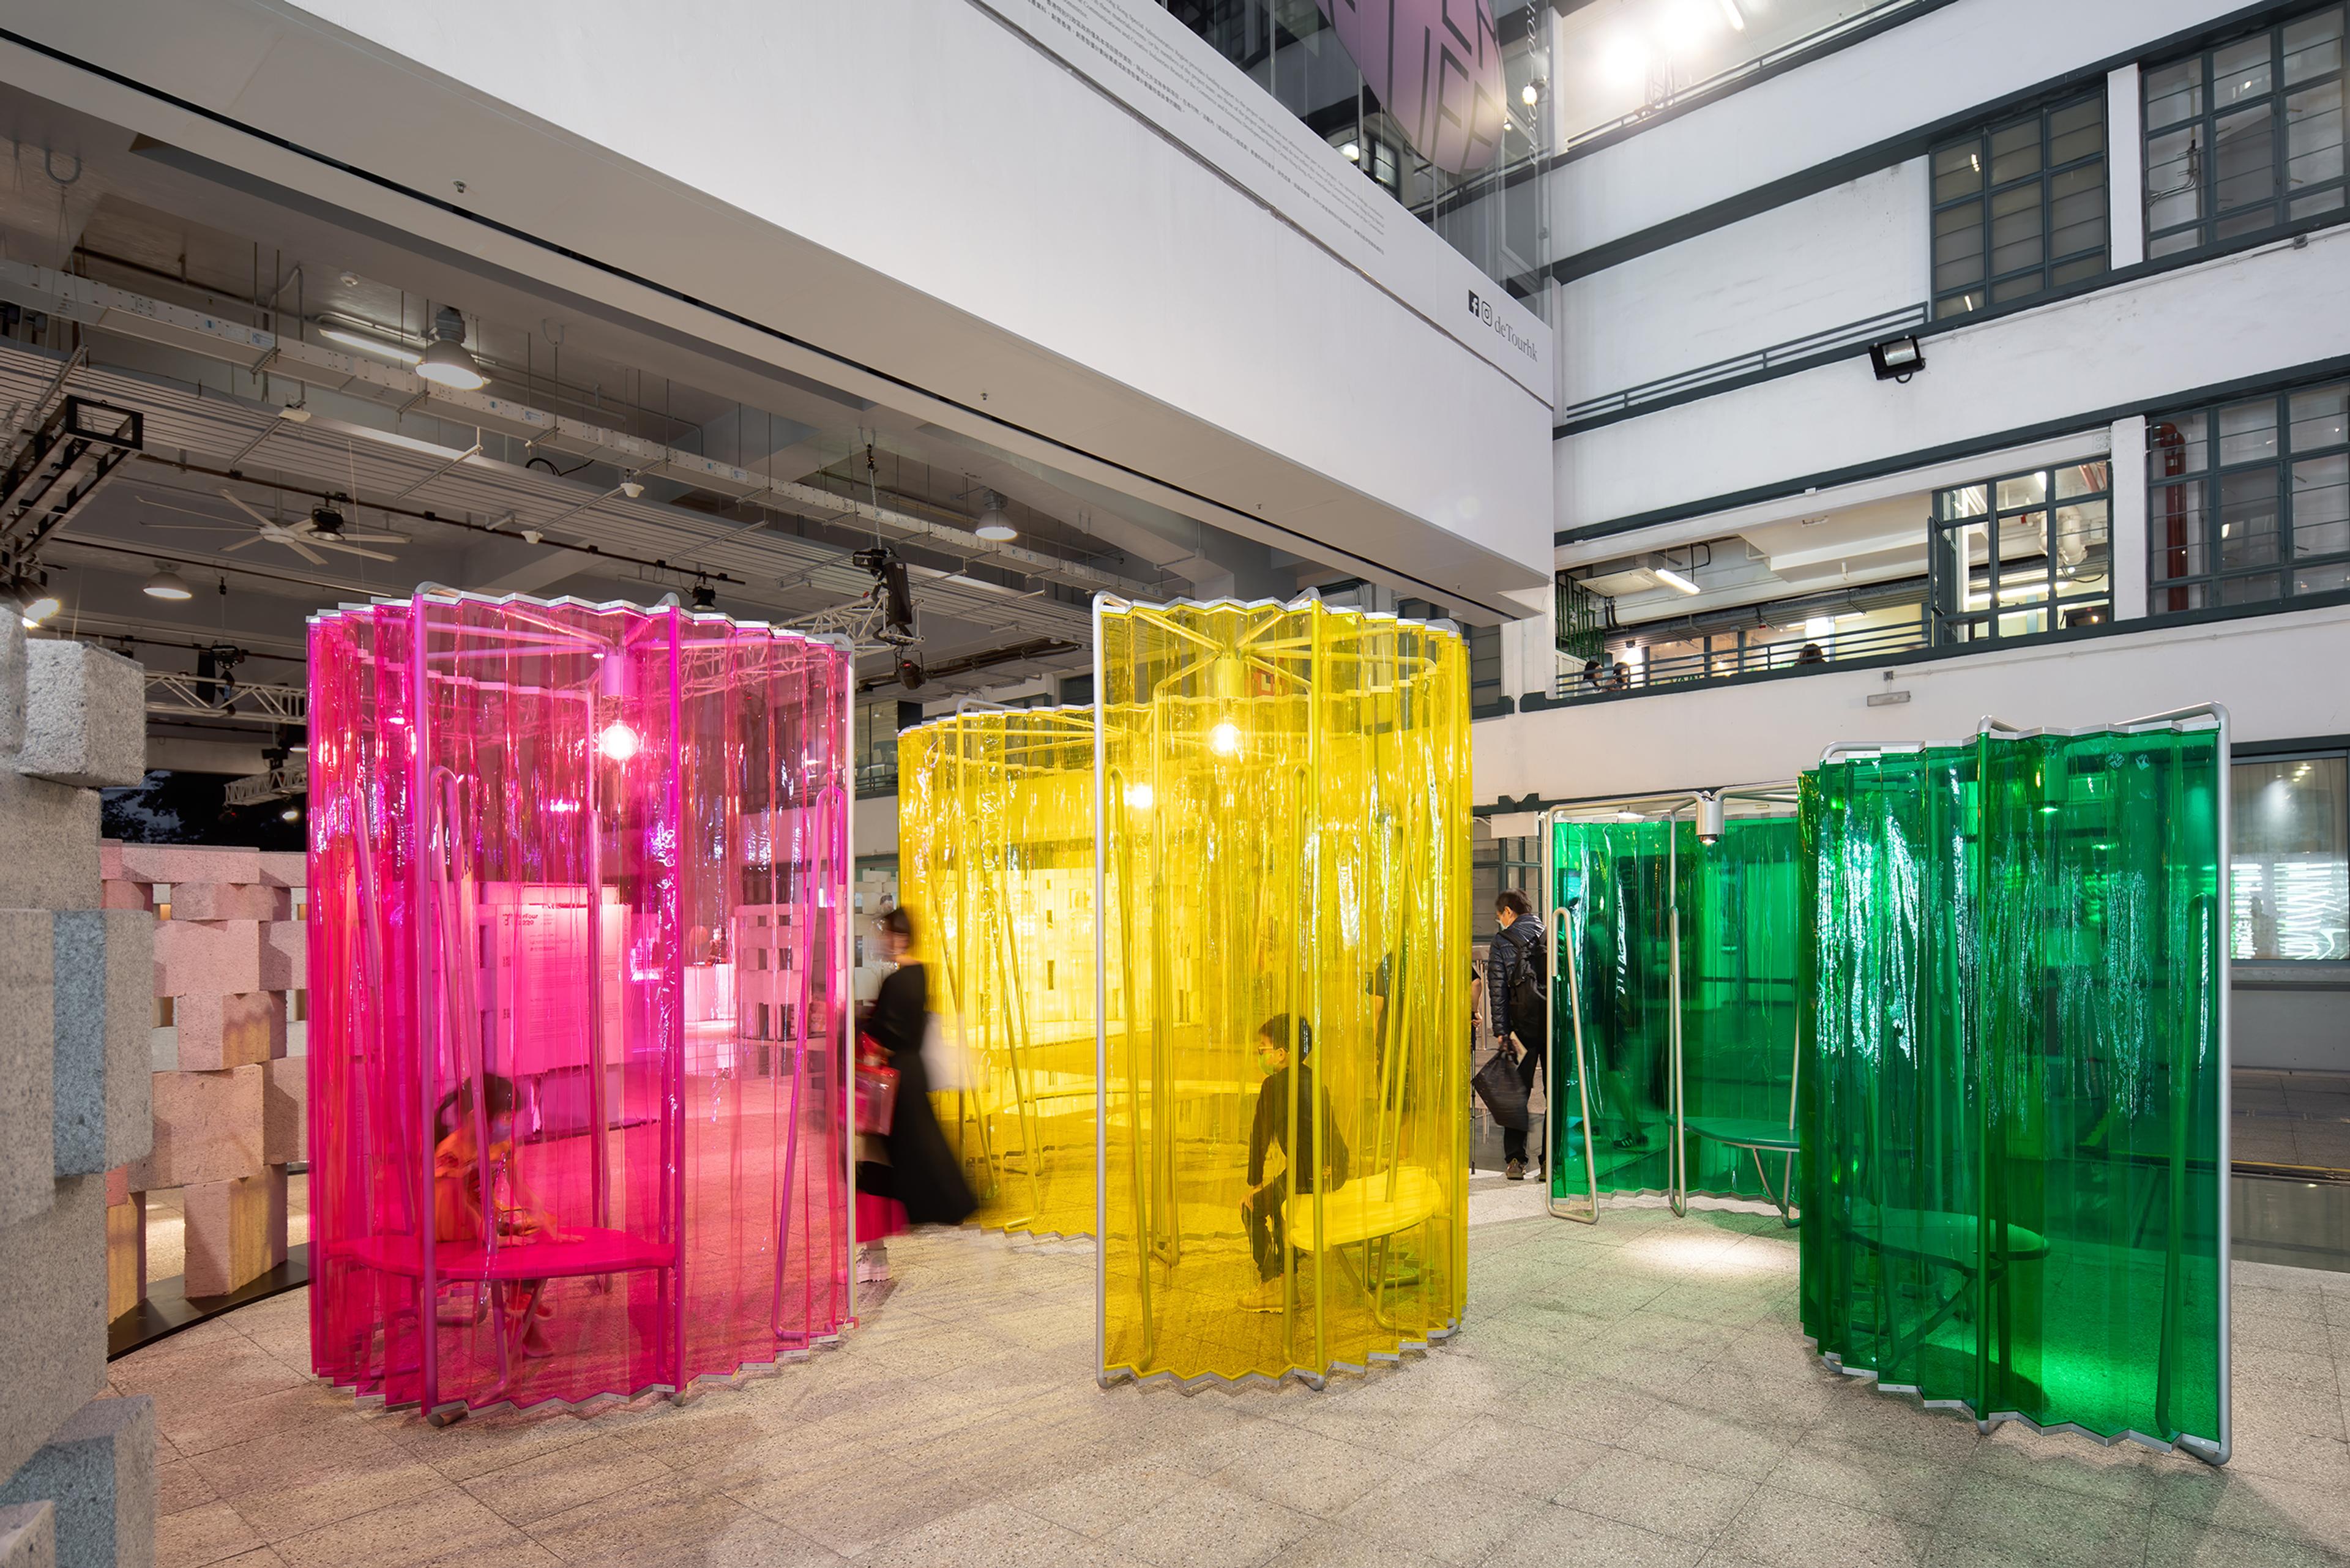 colorful installation inside building courtyard